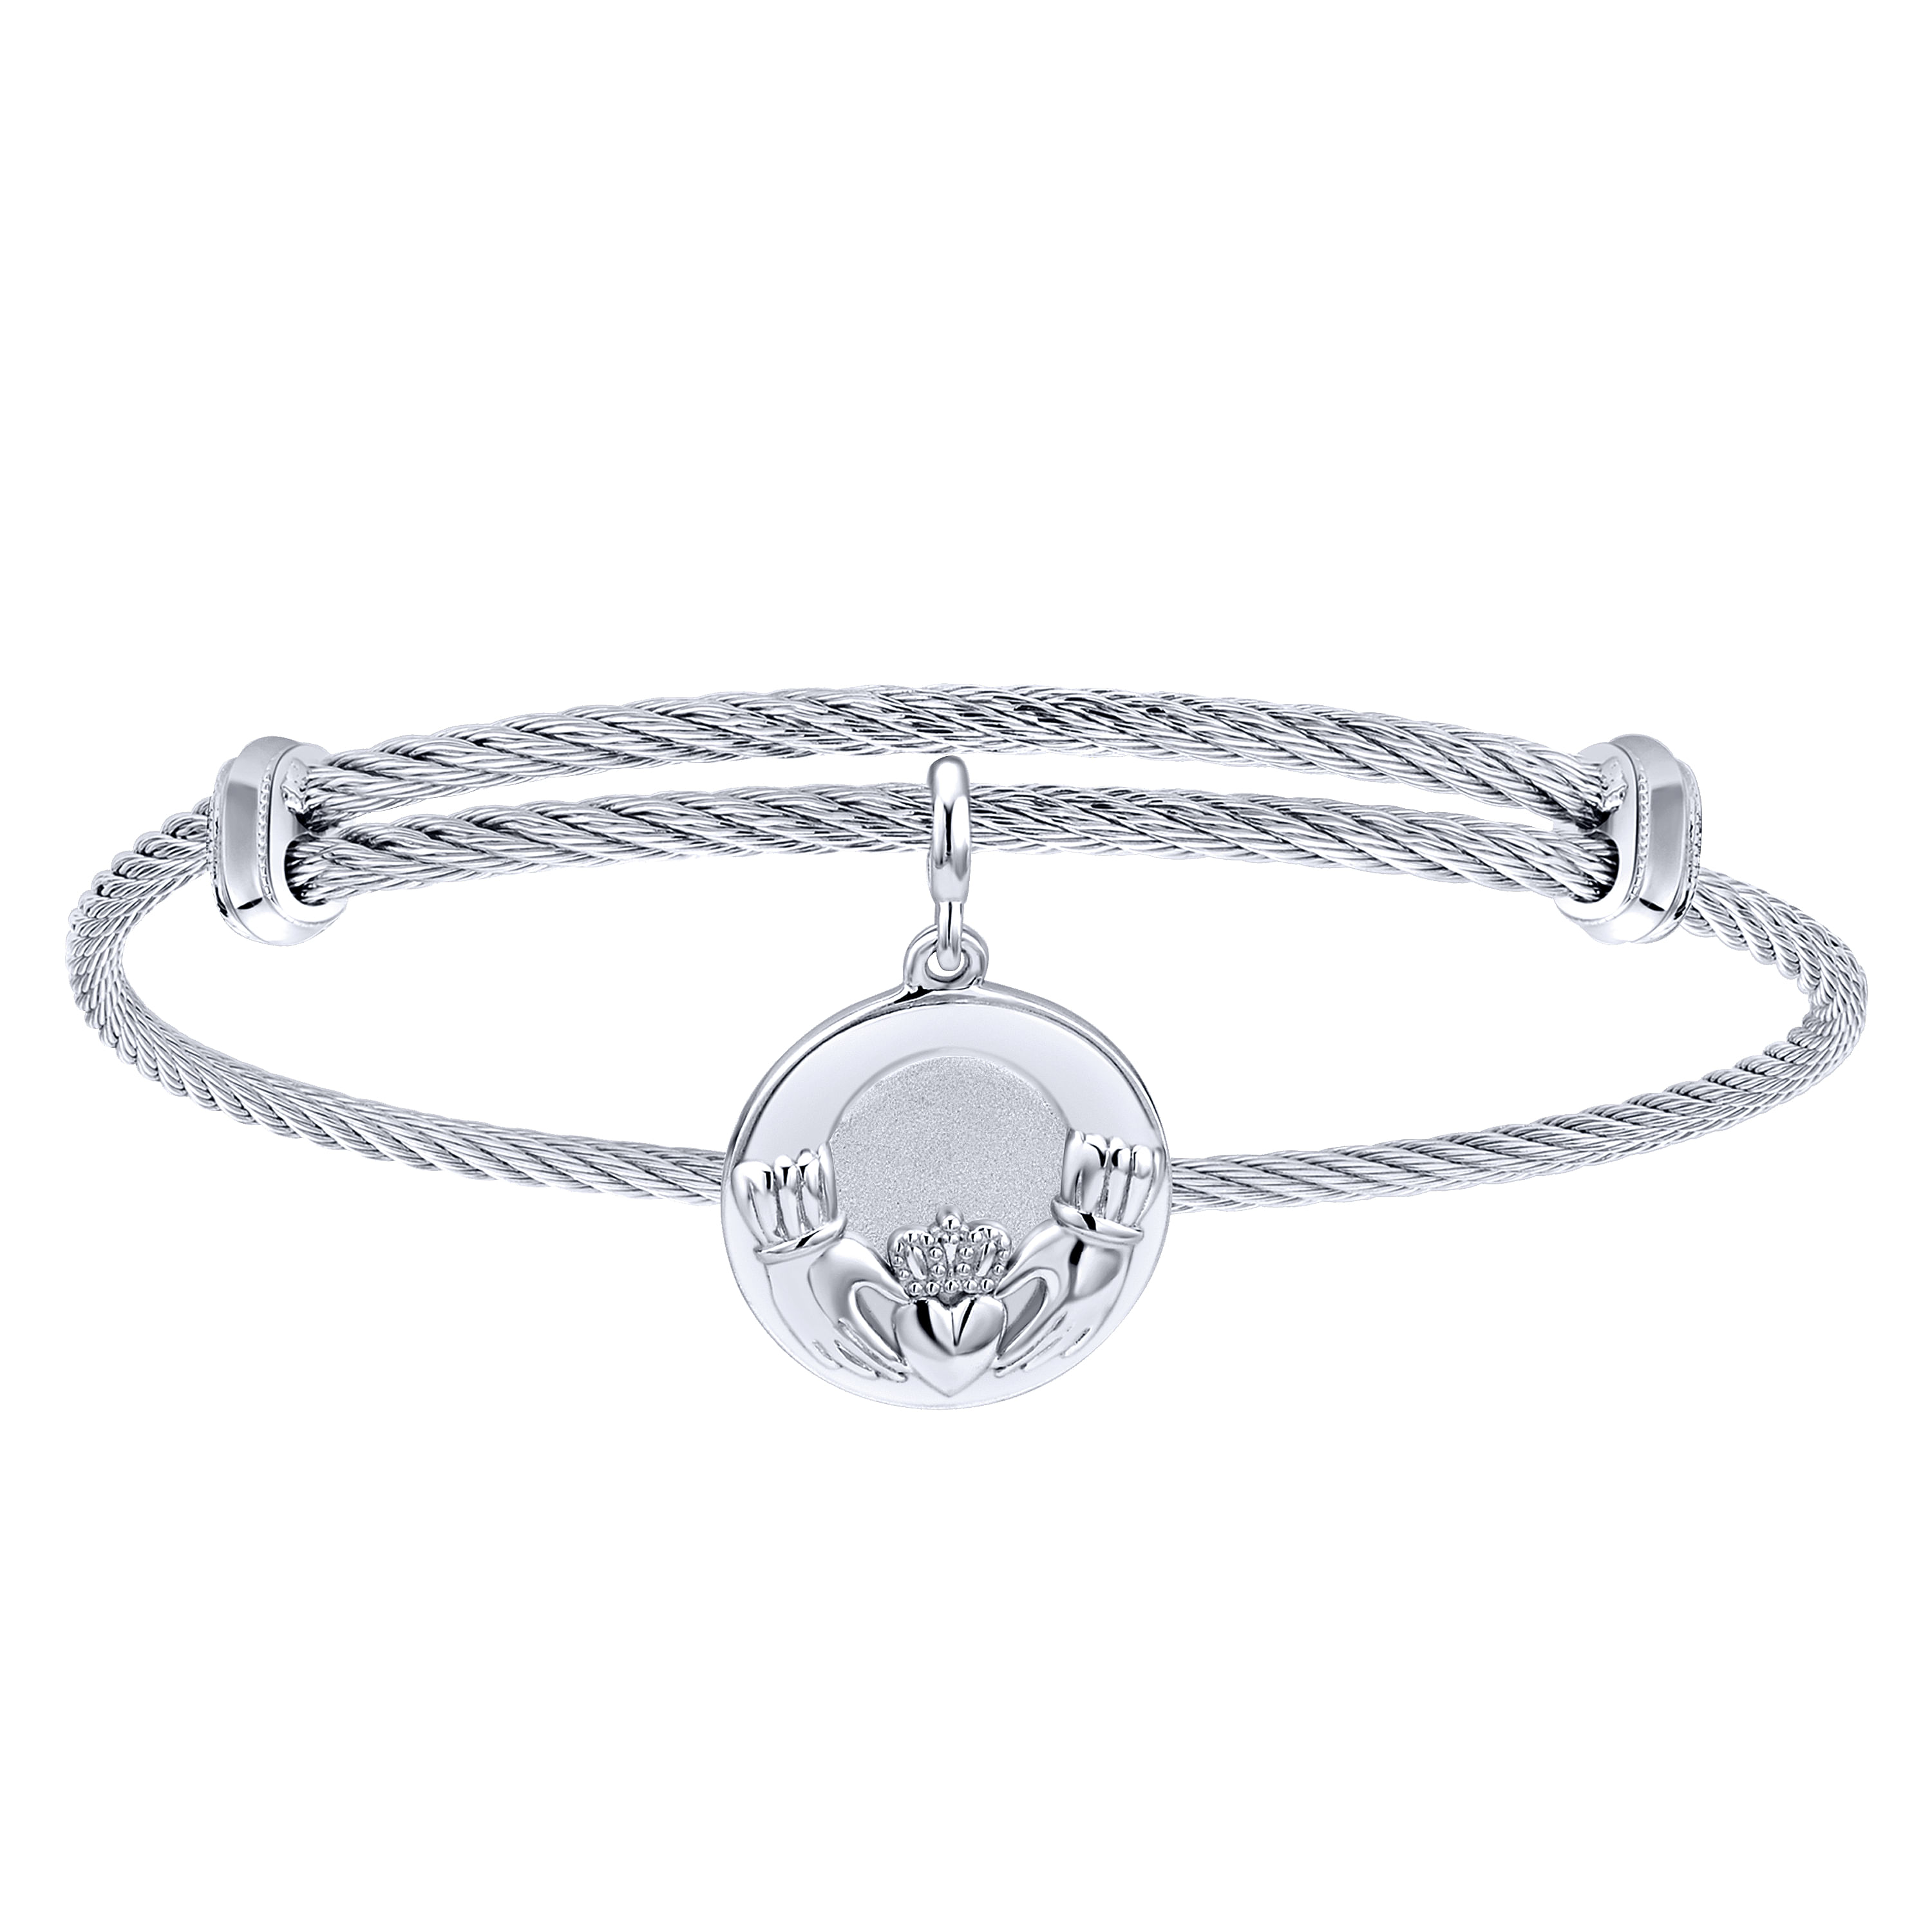 Adjustable Twisted Cable Stainless Steel Bangle with Sterling Silver Loving Hands Charm